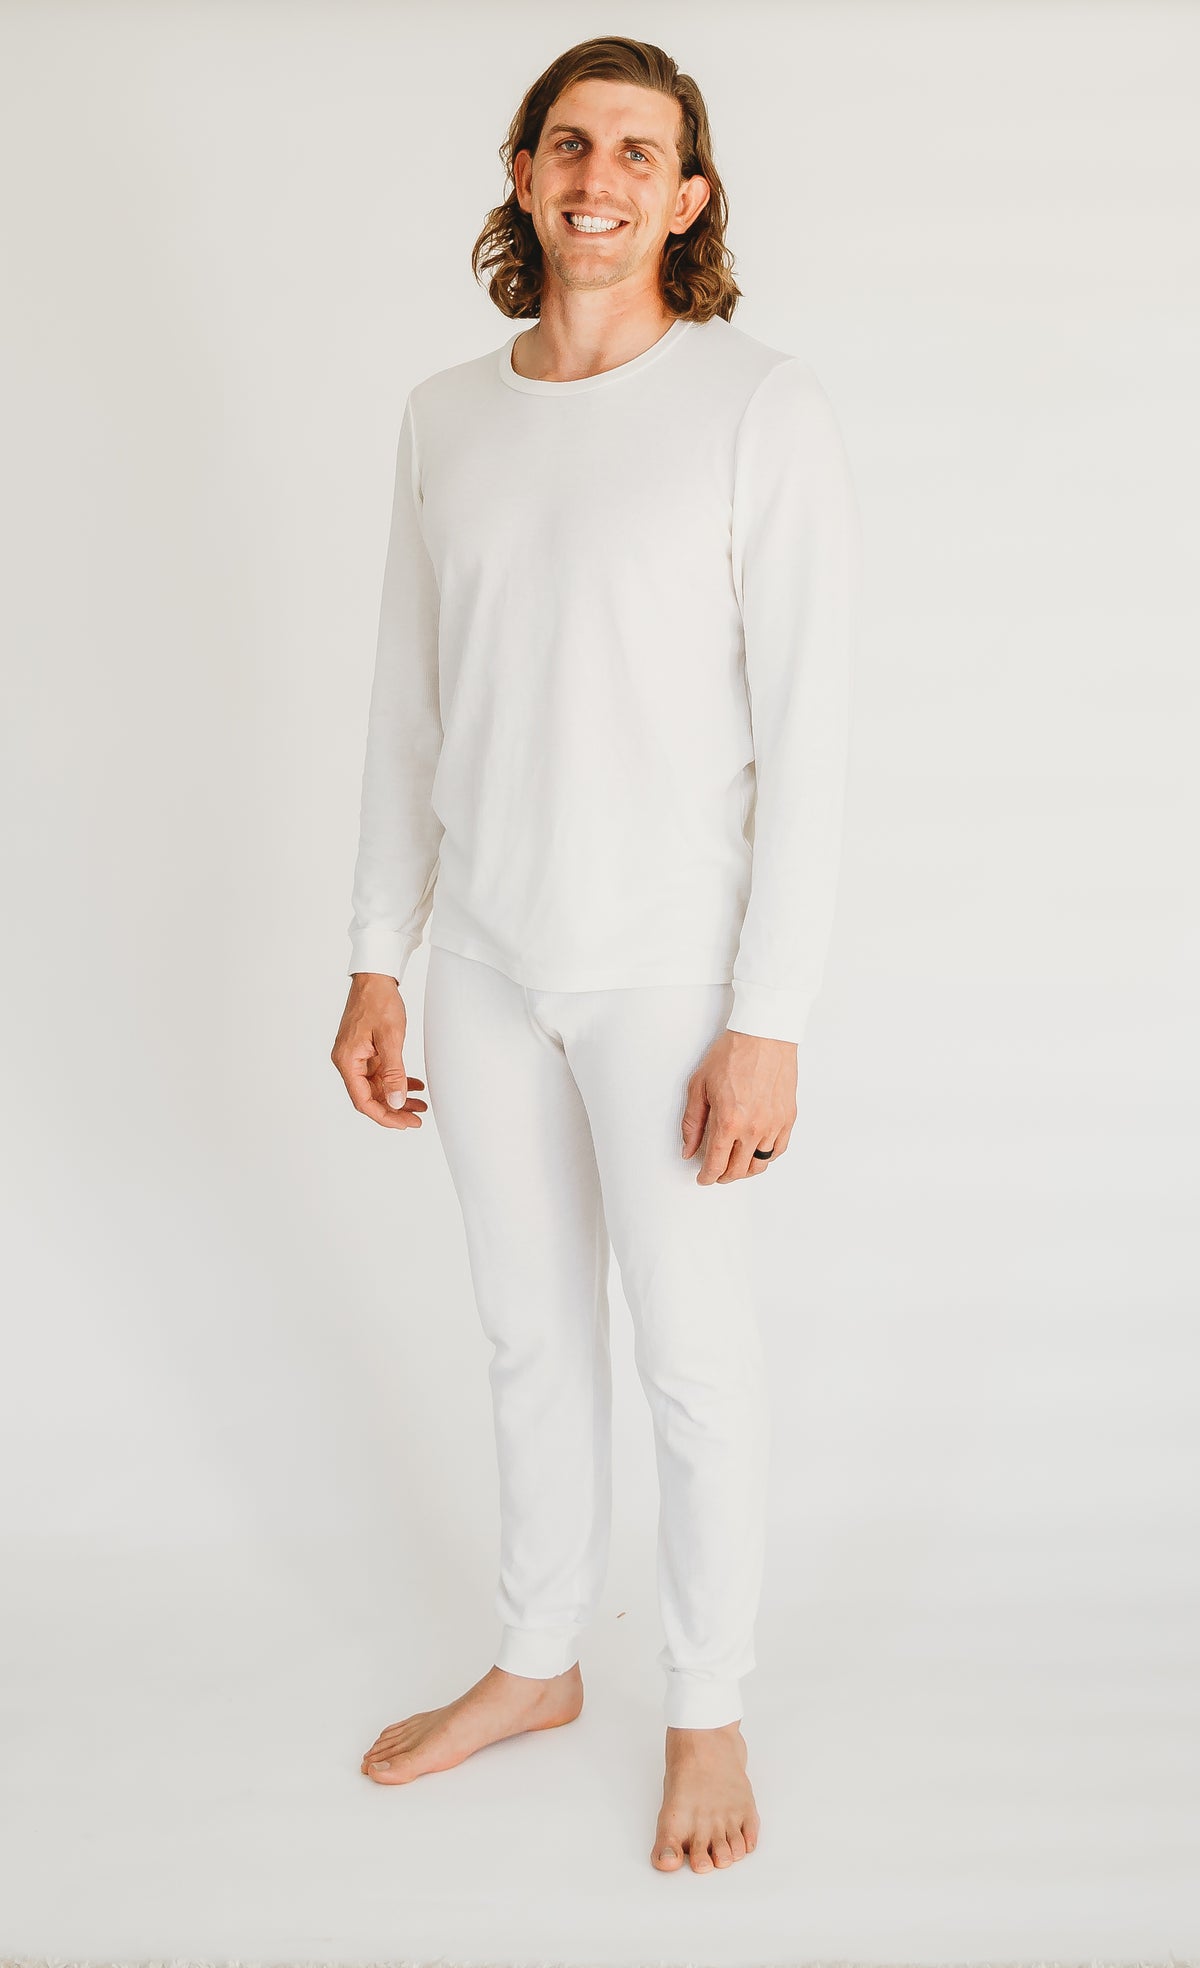 Men's Thermal 2-Piece Long Johns - City Threads USA